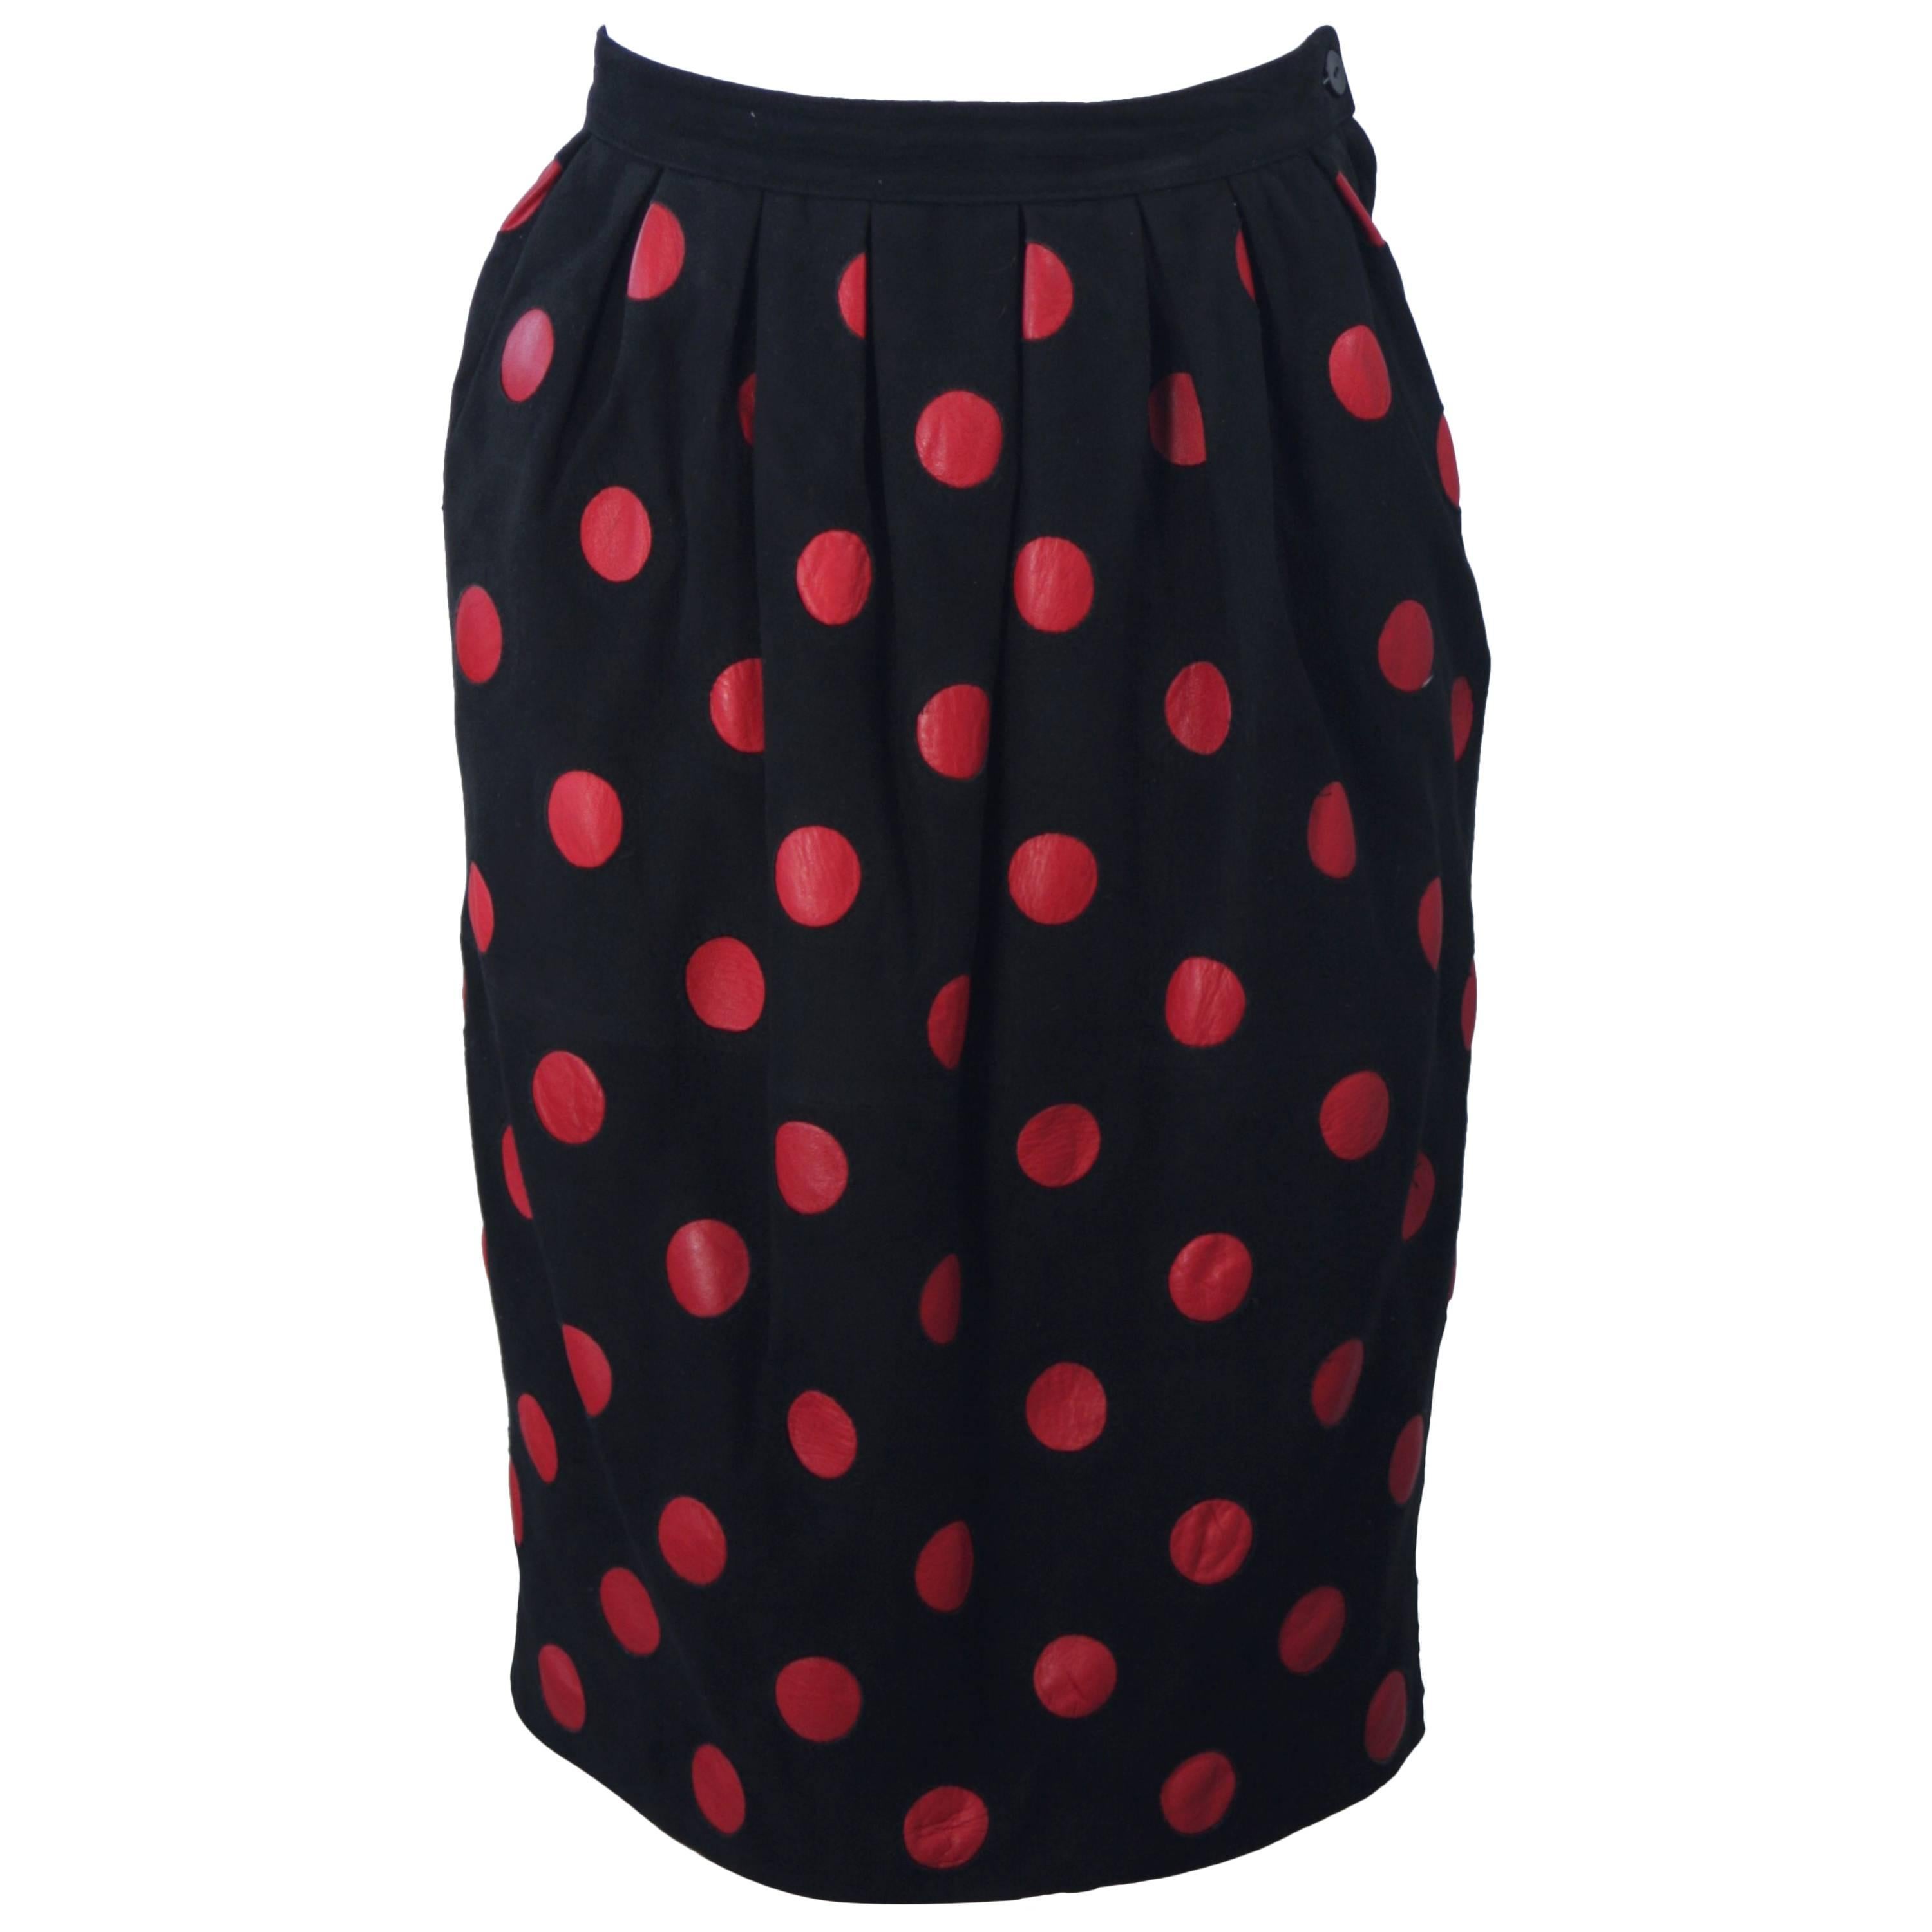 VALENTINO Black Suede Skirt with Red Leather Polka Dots Size 4-6 For Sale